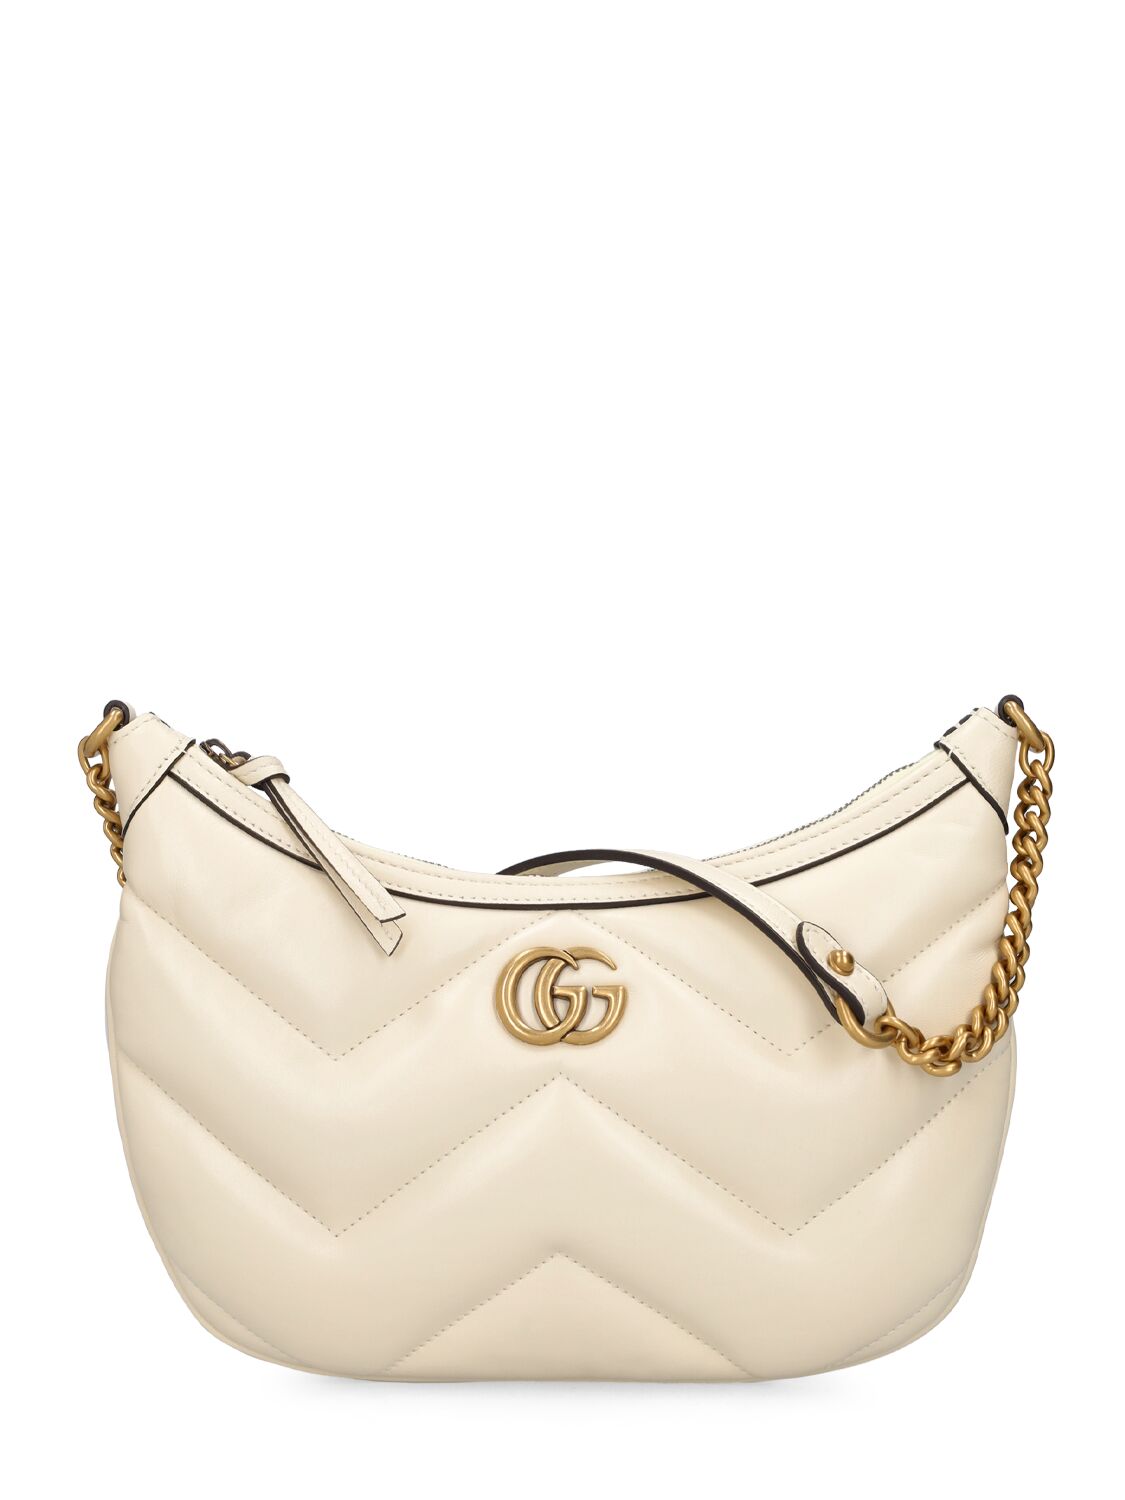 Small Gg Marmont Leather Shoulder Bag